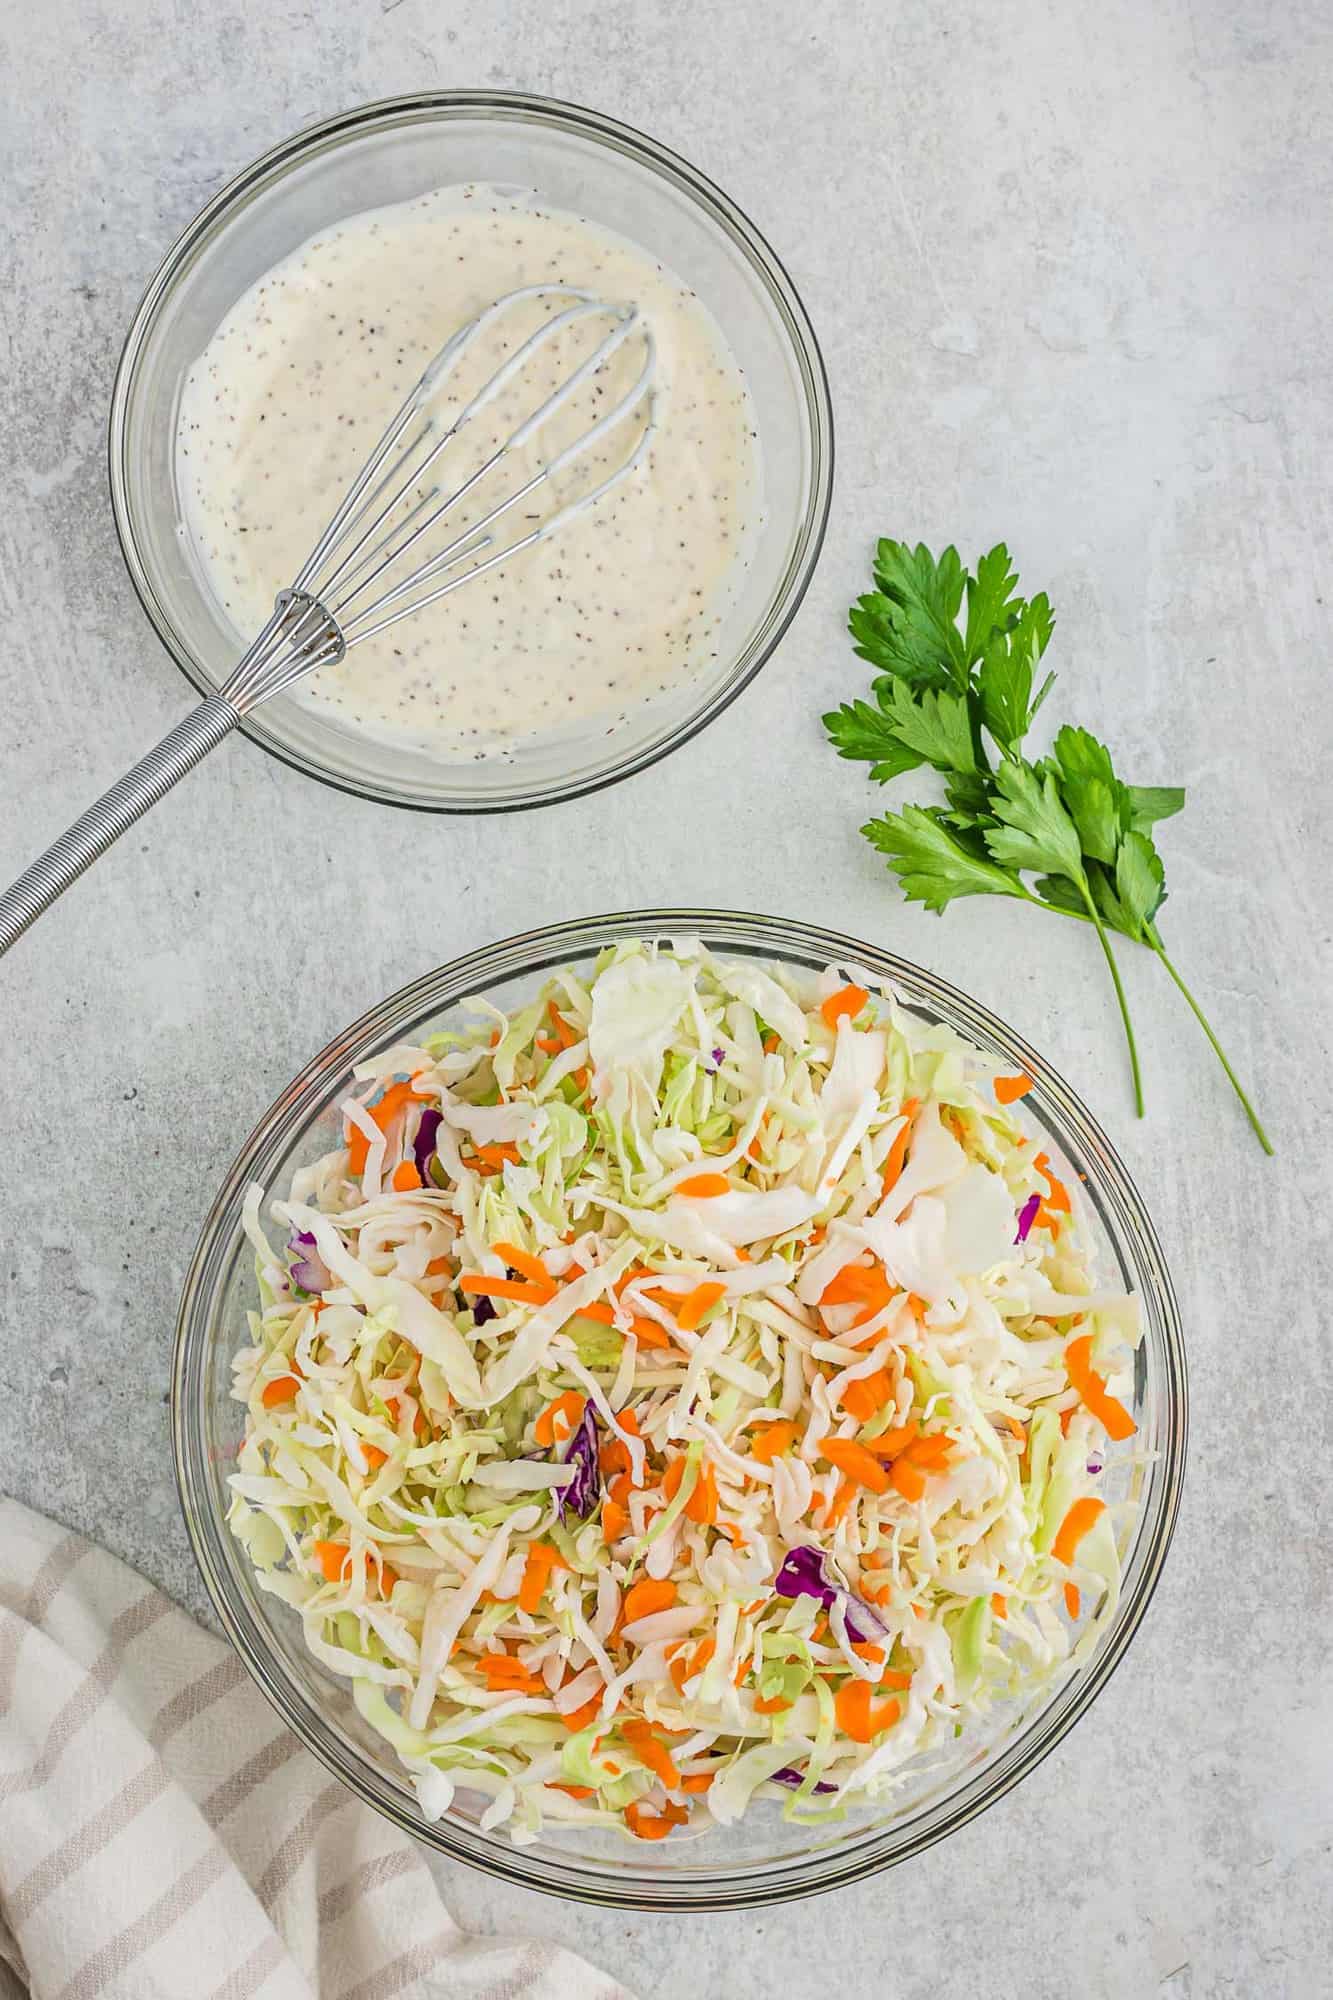 Shredded cabbage in one bowl, coleslaw dressing in another.